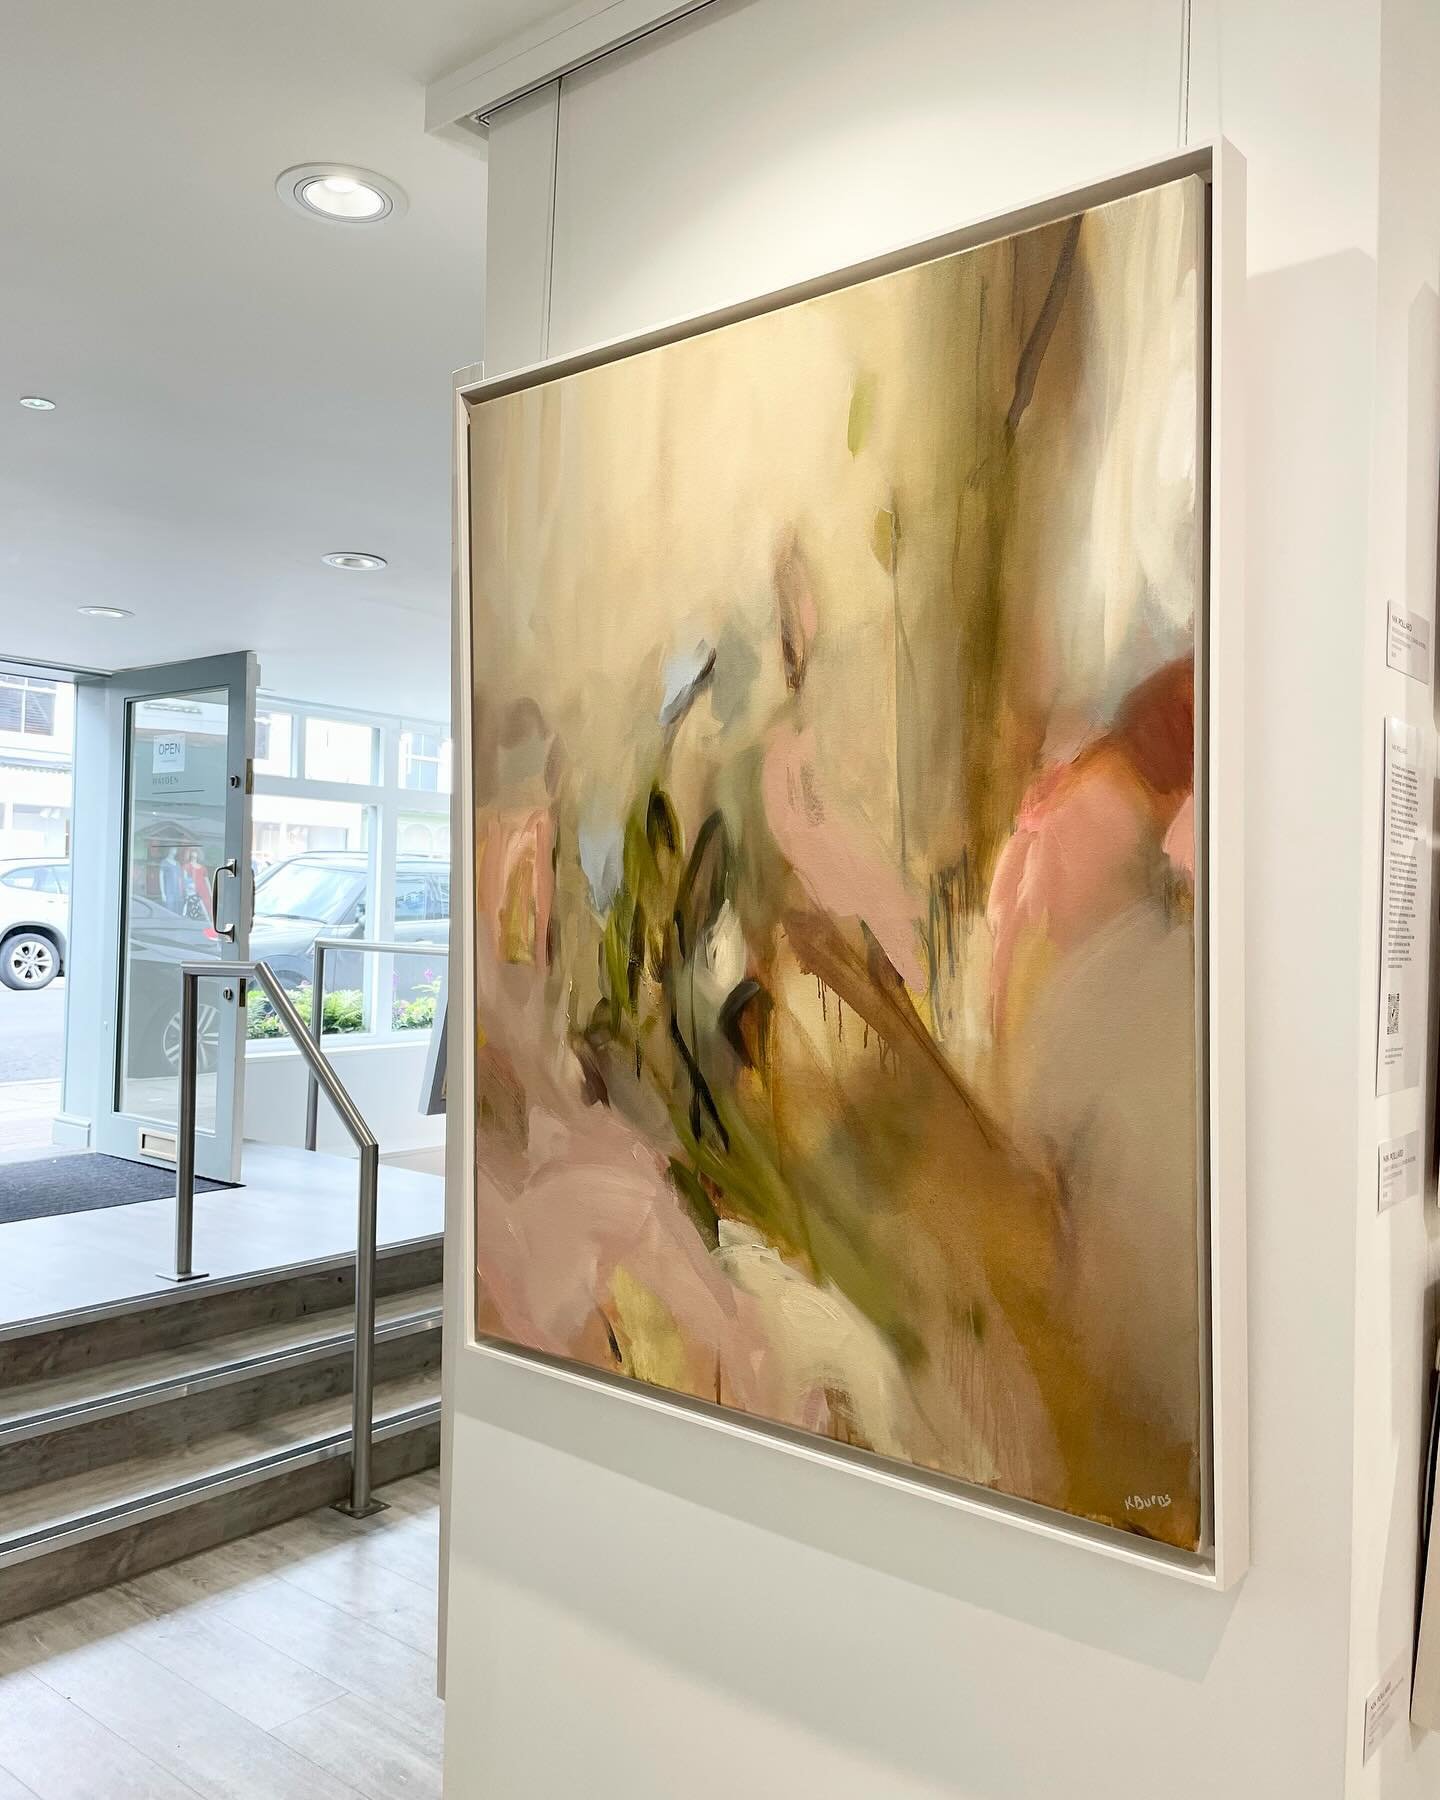 Thank you @haydengallery for a beautiful opening reception last weekend 🤍 🥂

&lsquo;Butterflies&rsquo;, 80x100cm, oil on canvas
One of a collection on display in Marlow